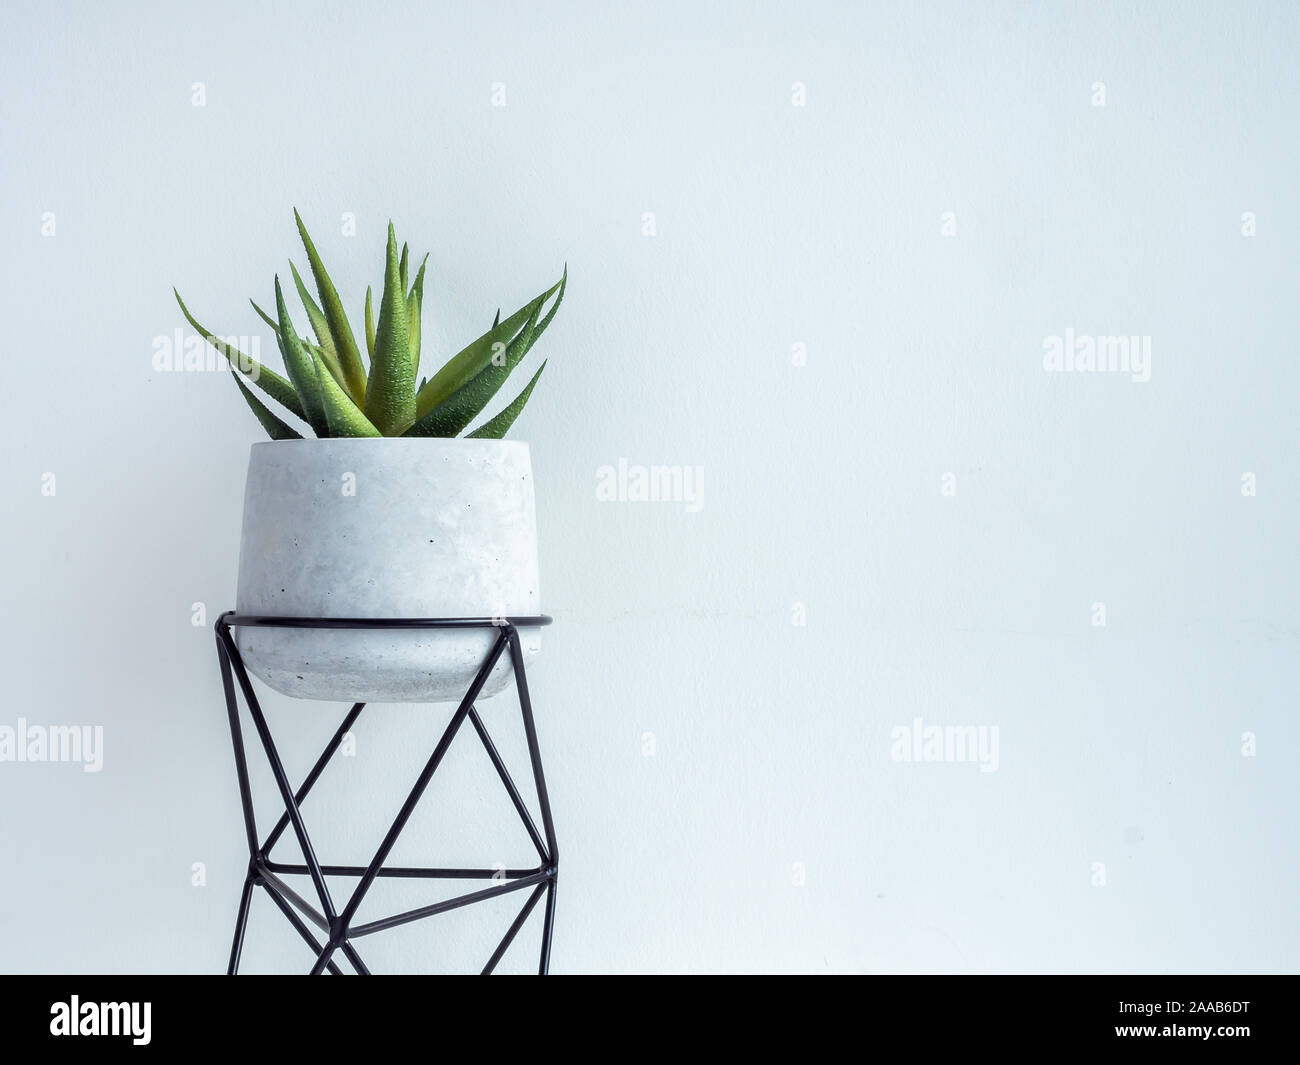 Cactus pot. Concrete pot with iron stand. Green succulent plant in modern standing planter isolated on white background with copy space. Stock Photo